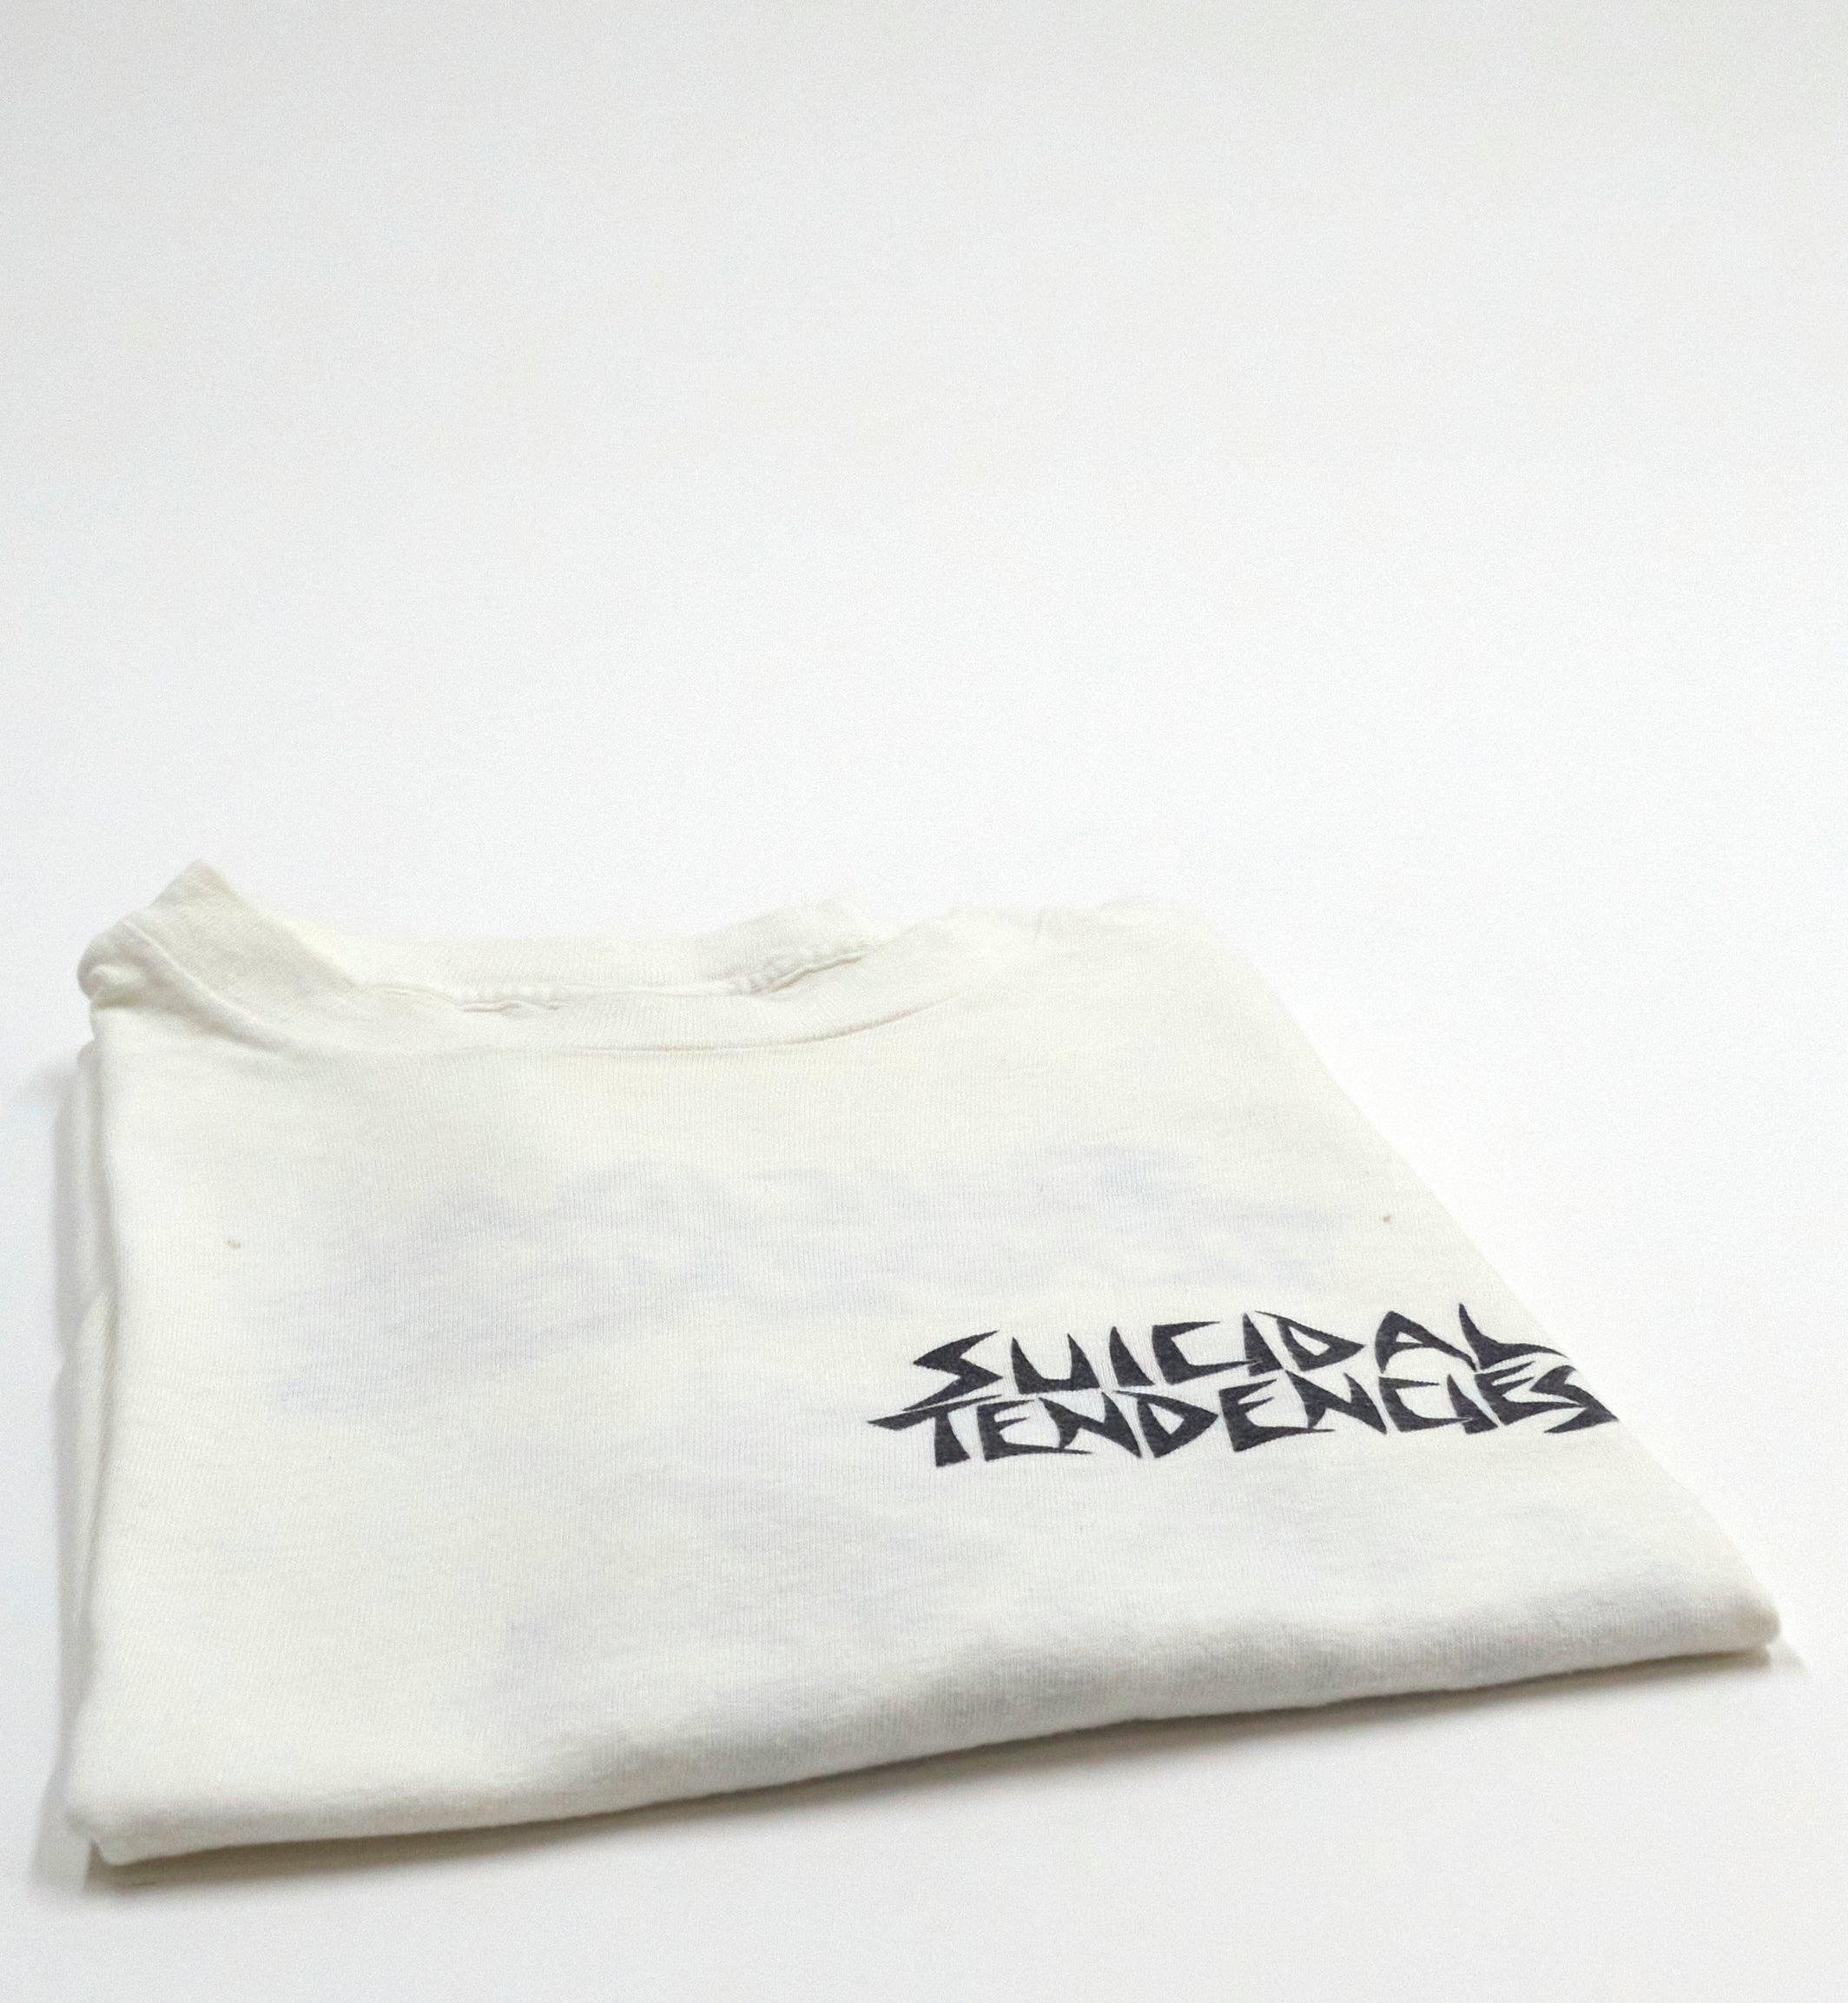 Suicidal Tendencies - Possessed Late 80's / Early 90's Tour Shirt Size XL